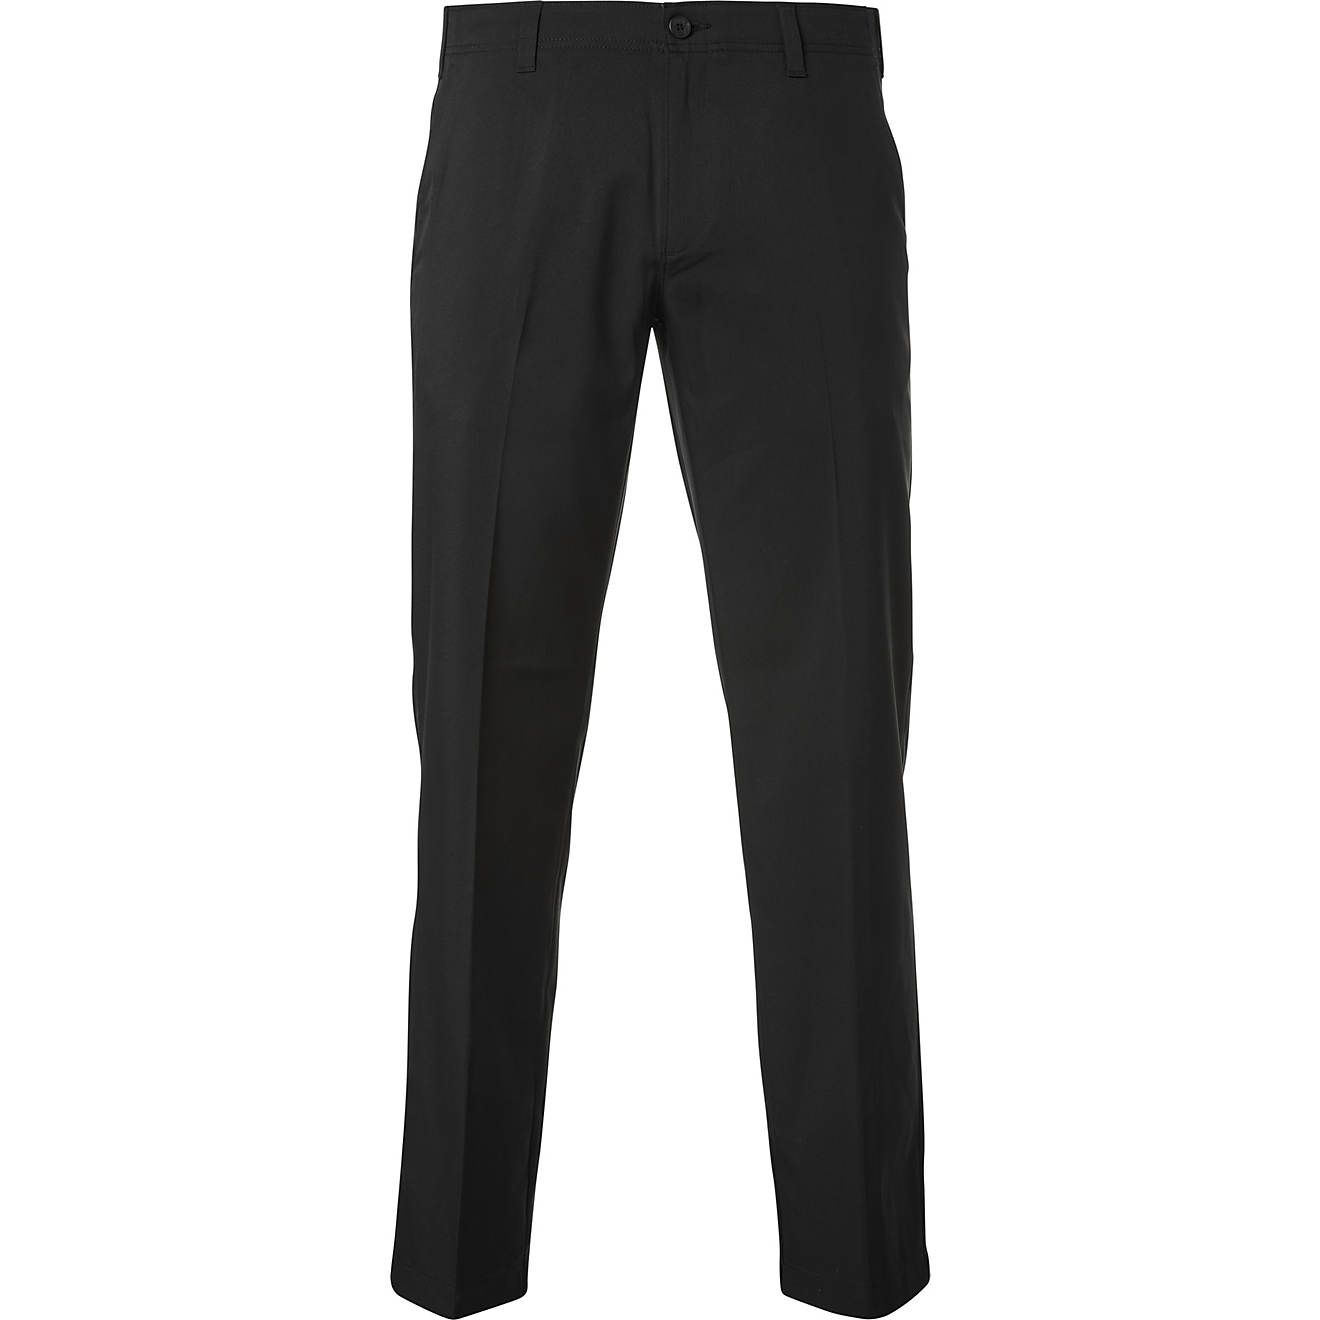 BCG Men's Essential Golf Pants | Academy | Academy Sports + Outdoors